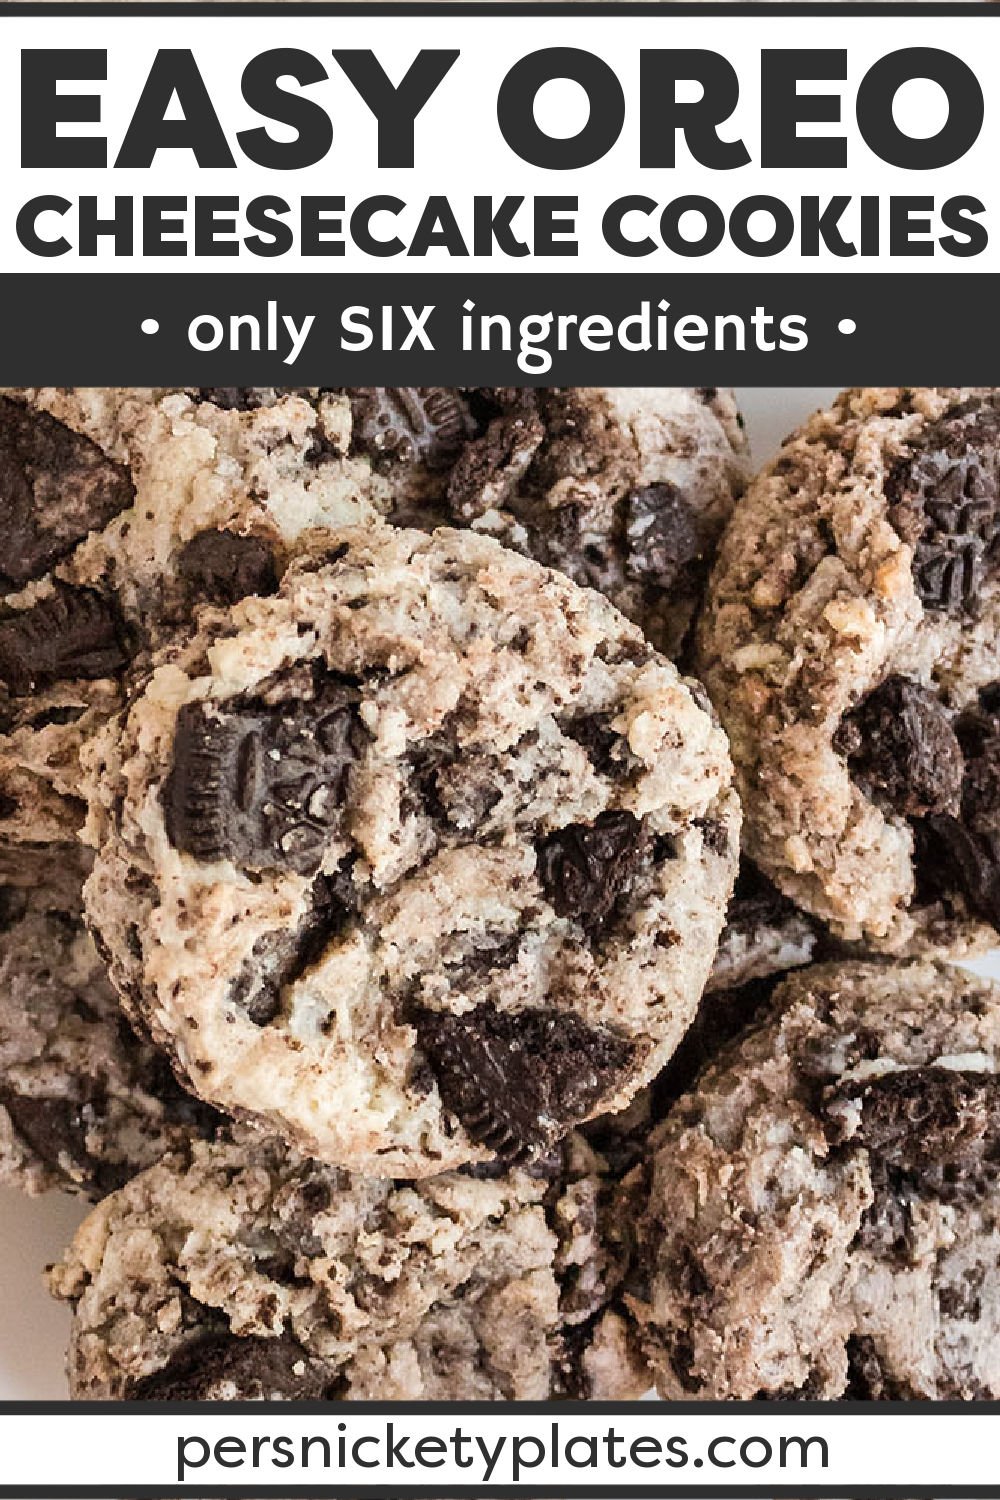 Oreo Cheesecake Cookies are made from scratch with just six ingredients! Filled with crushed Oreos, these fluffy, chocolatey cookies have a soft and creamy inside that are perfect for the Oreo cookie lover. | www.persnicketyplates.com